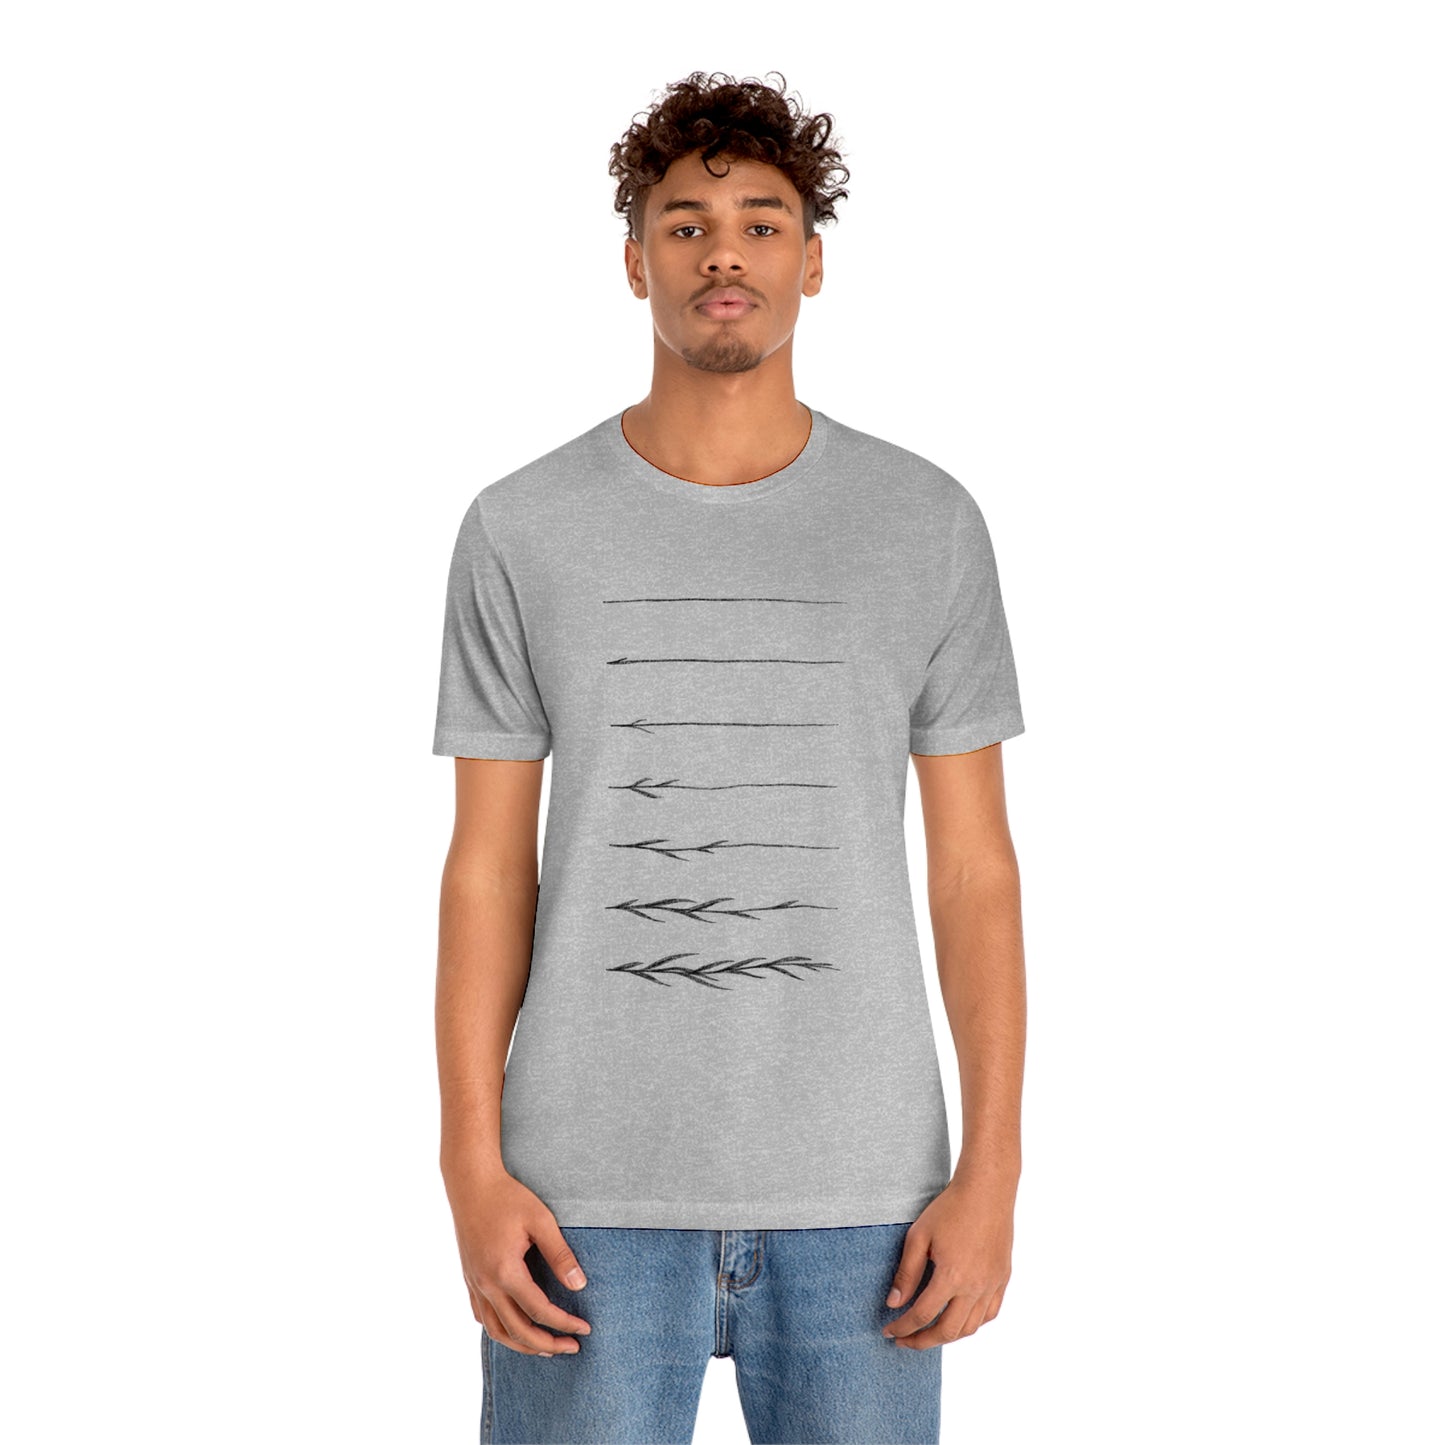 Time Testers Short Sleeve Shirt